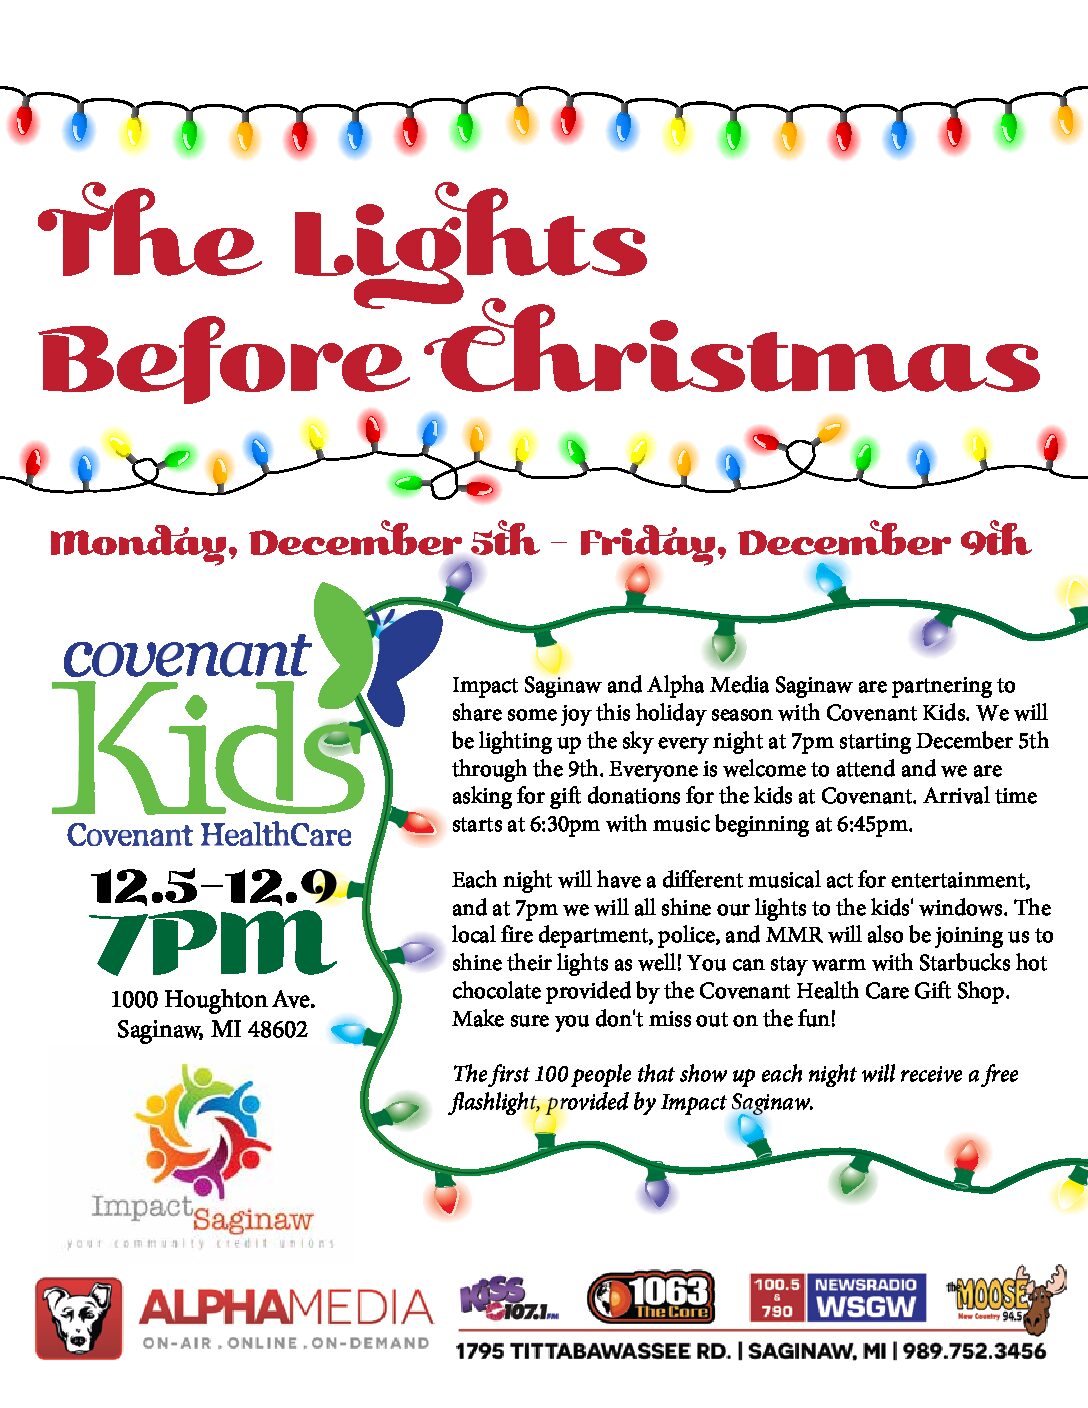 <h1 class="tribe-events-single-event-title">The Lights Before Christmas</h1>